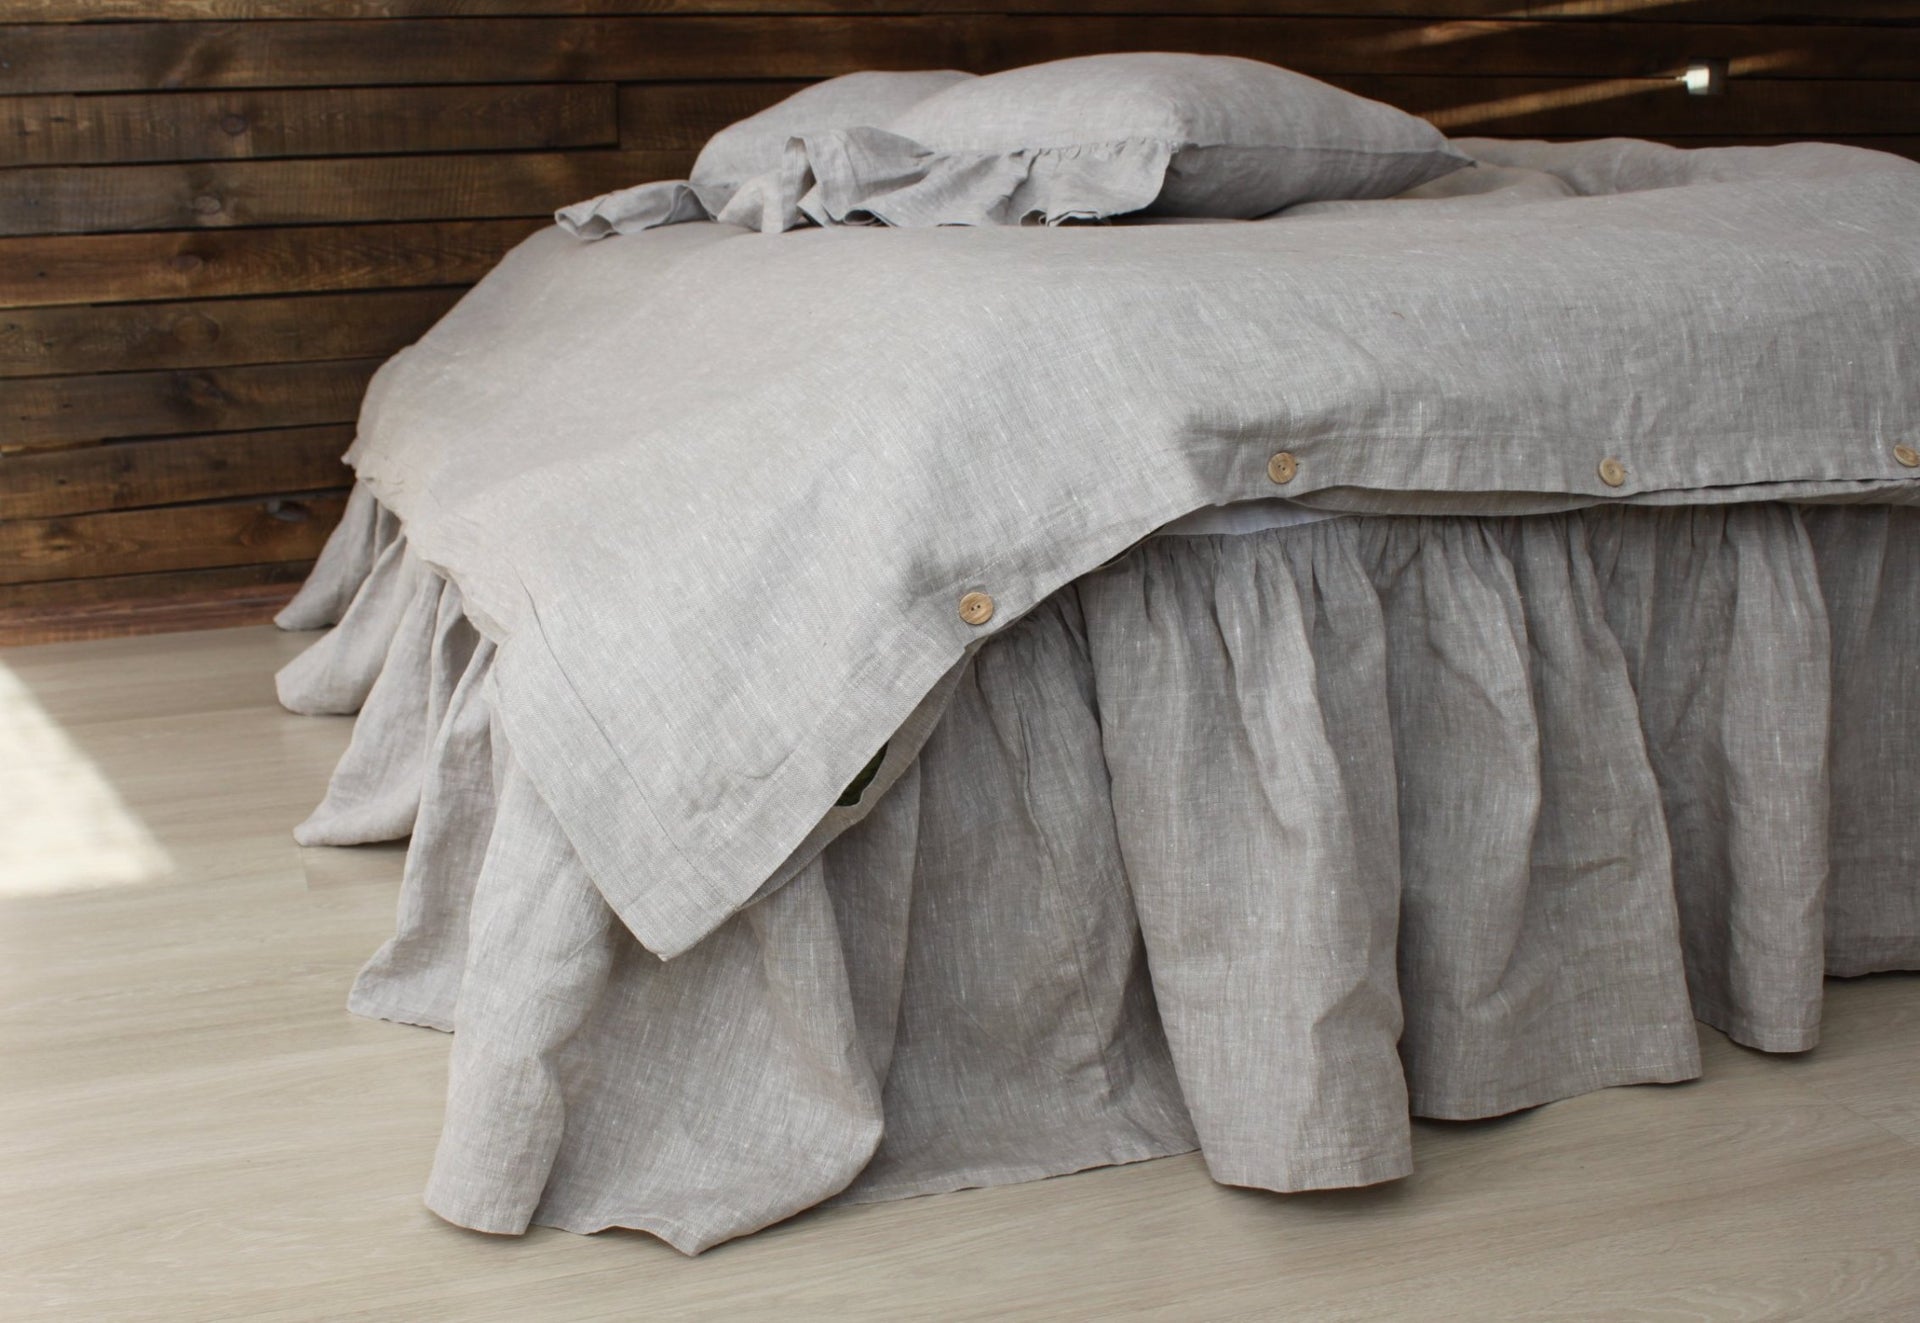 Linen Bed Skirt With Ruffles - Custom Sizes & Colors: Gray, White & More